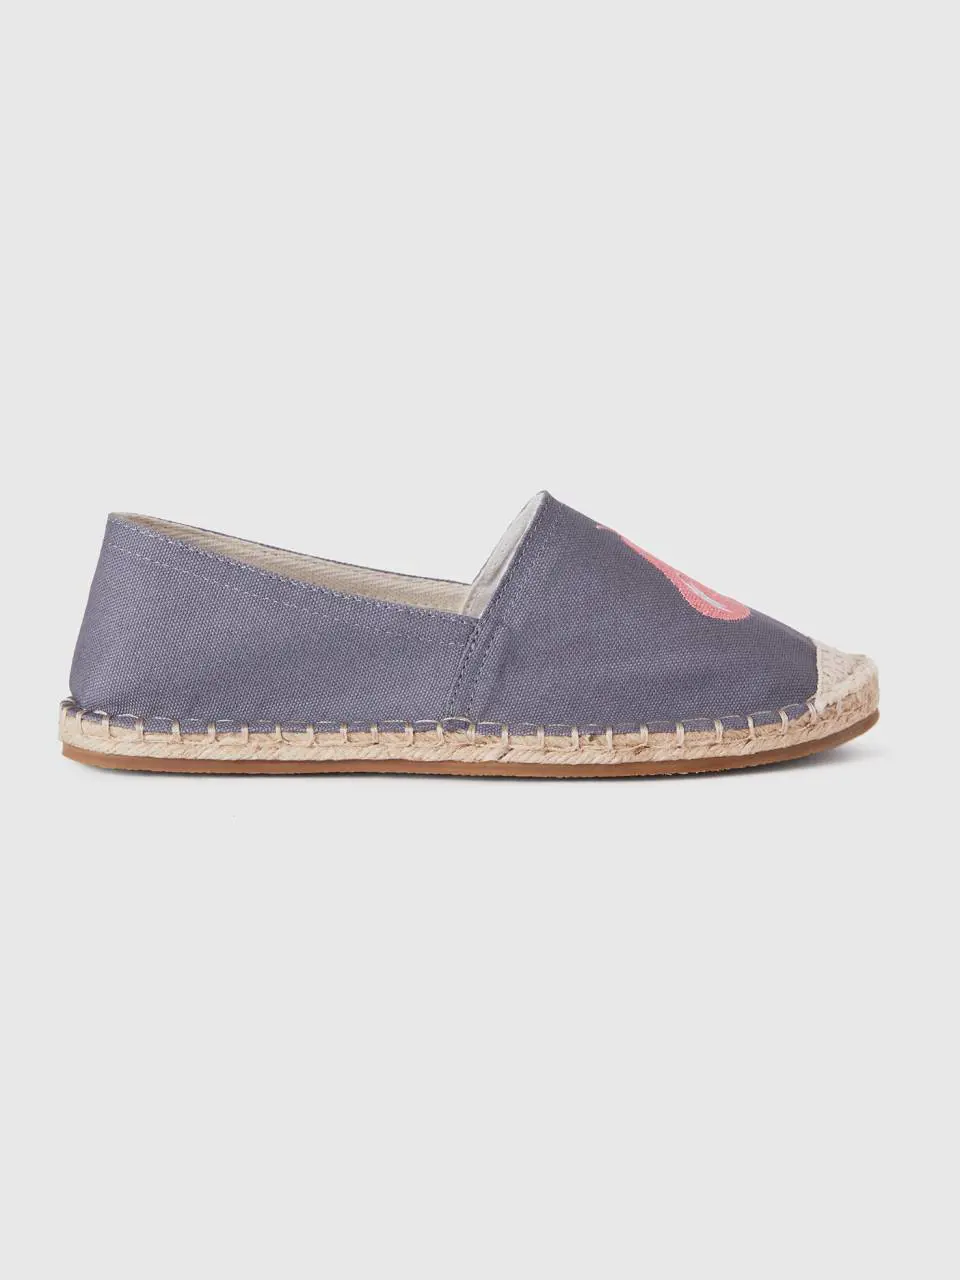 Benetton gray espadrilles with pear pattern. 1